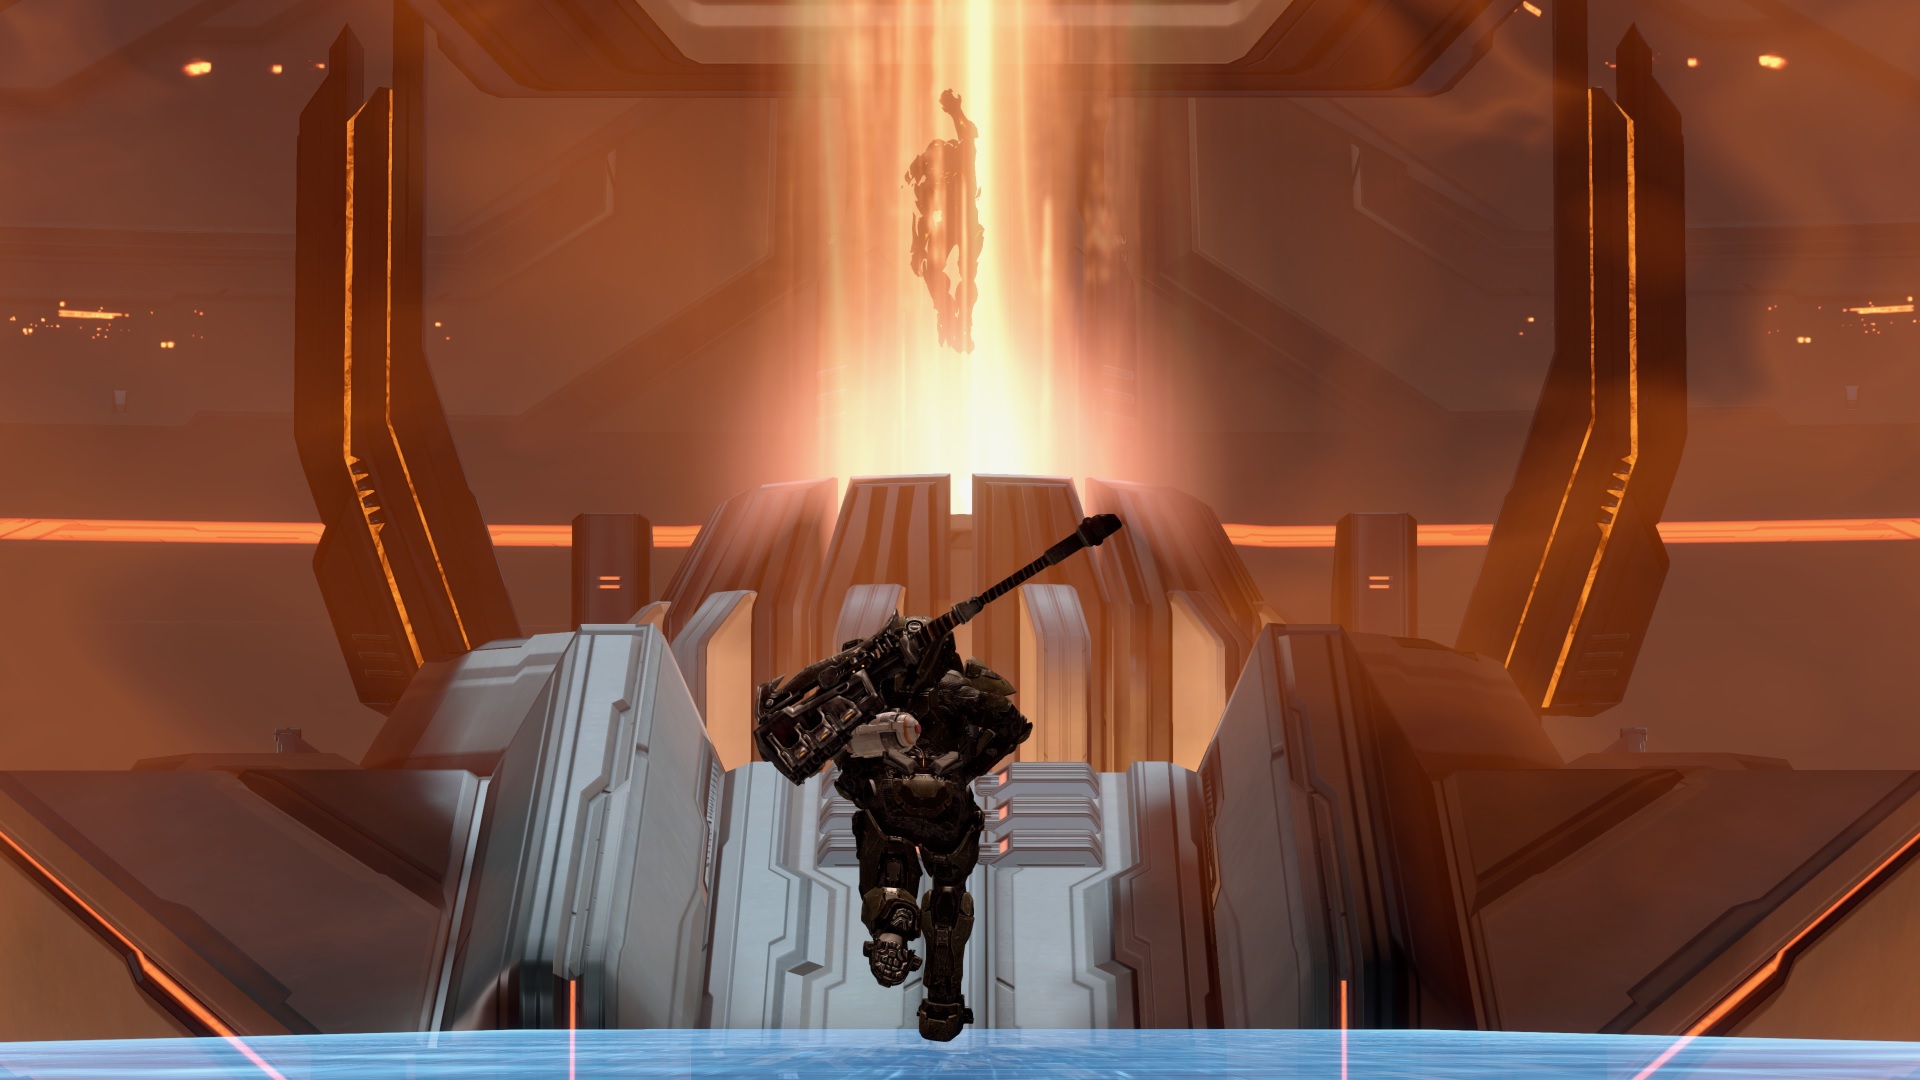 Halo 4 screenshot of the Master Chief sprinting towards the Didact within the Composer's beam